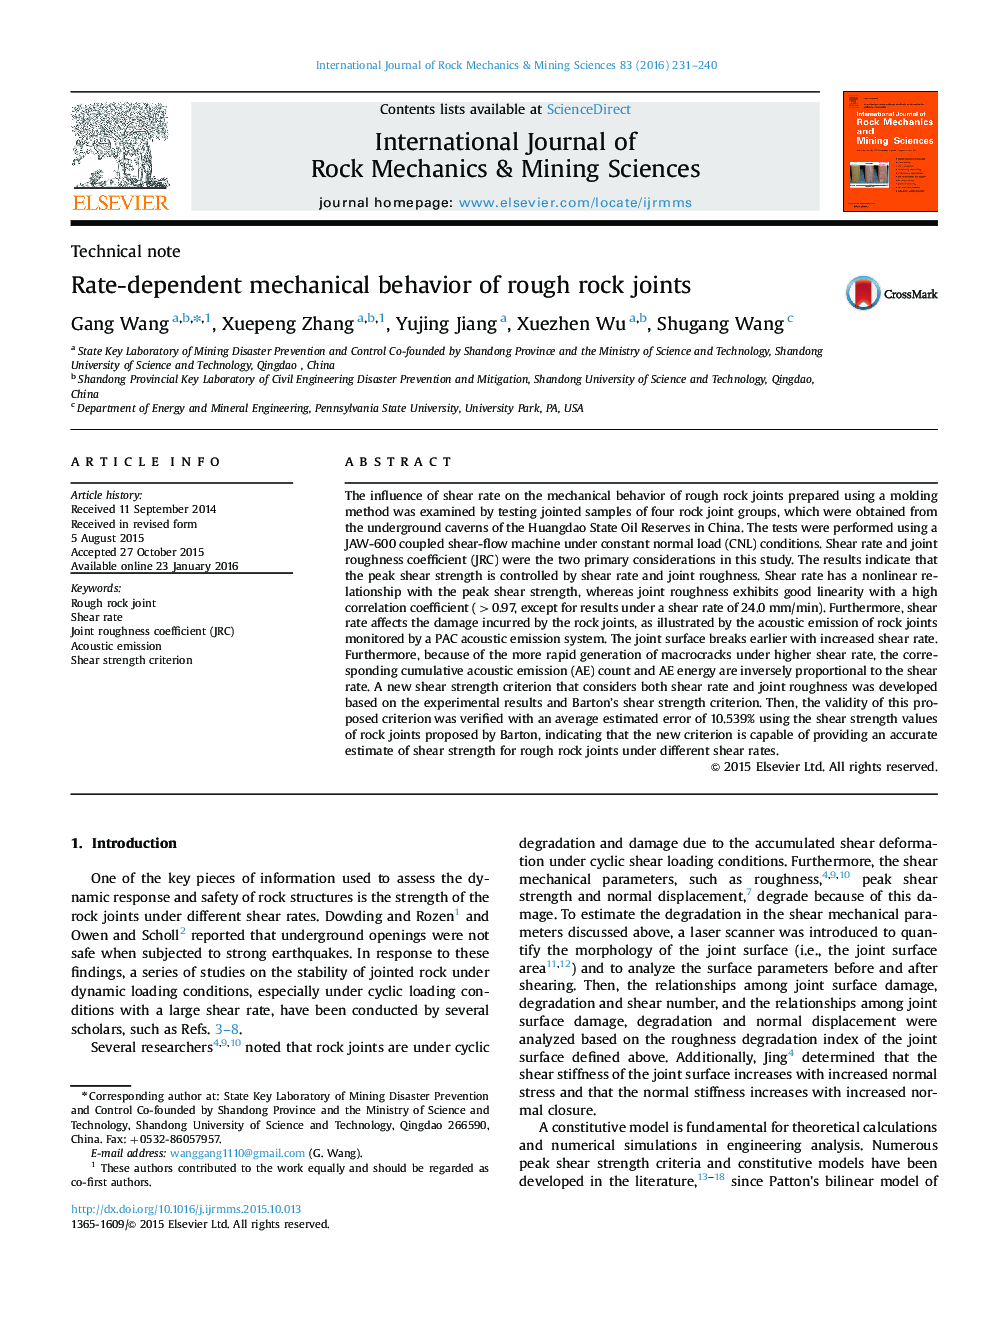 Rate-dependent mechanical behavior of rough rock joints